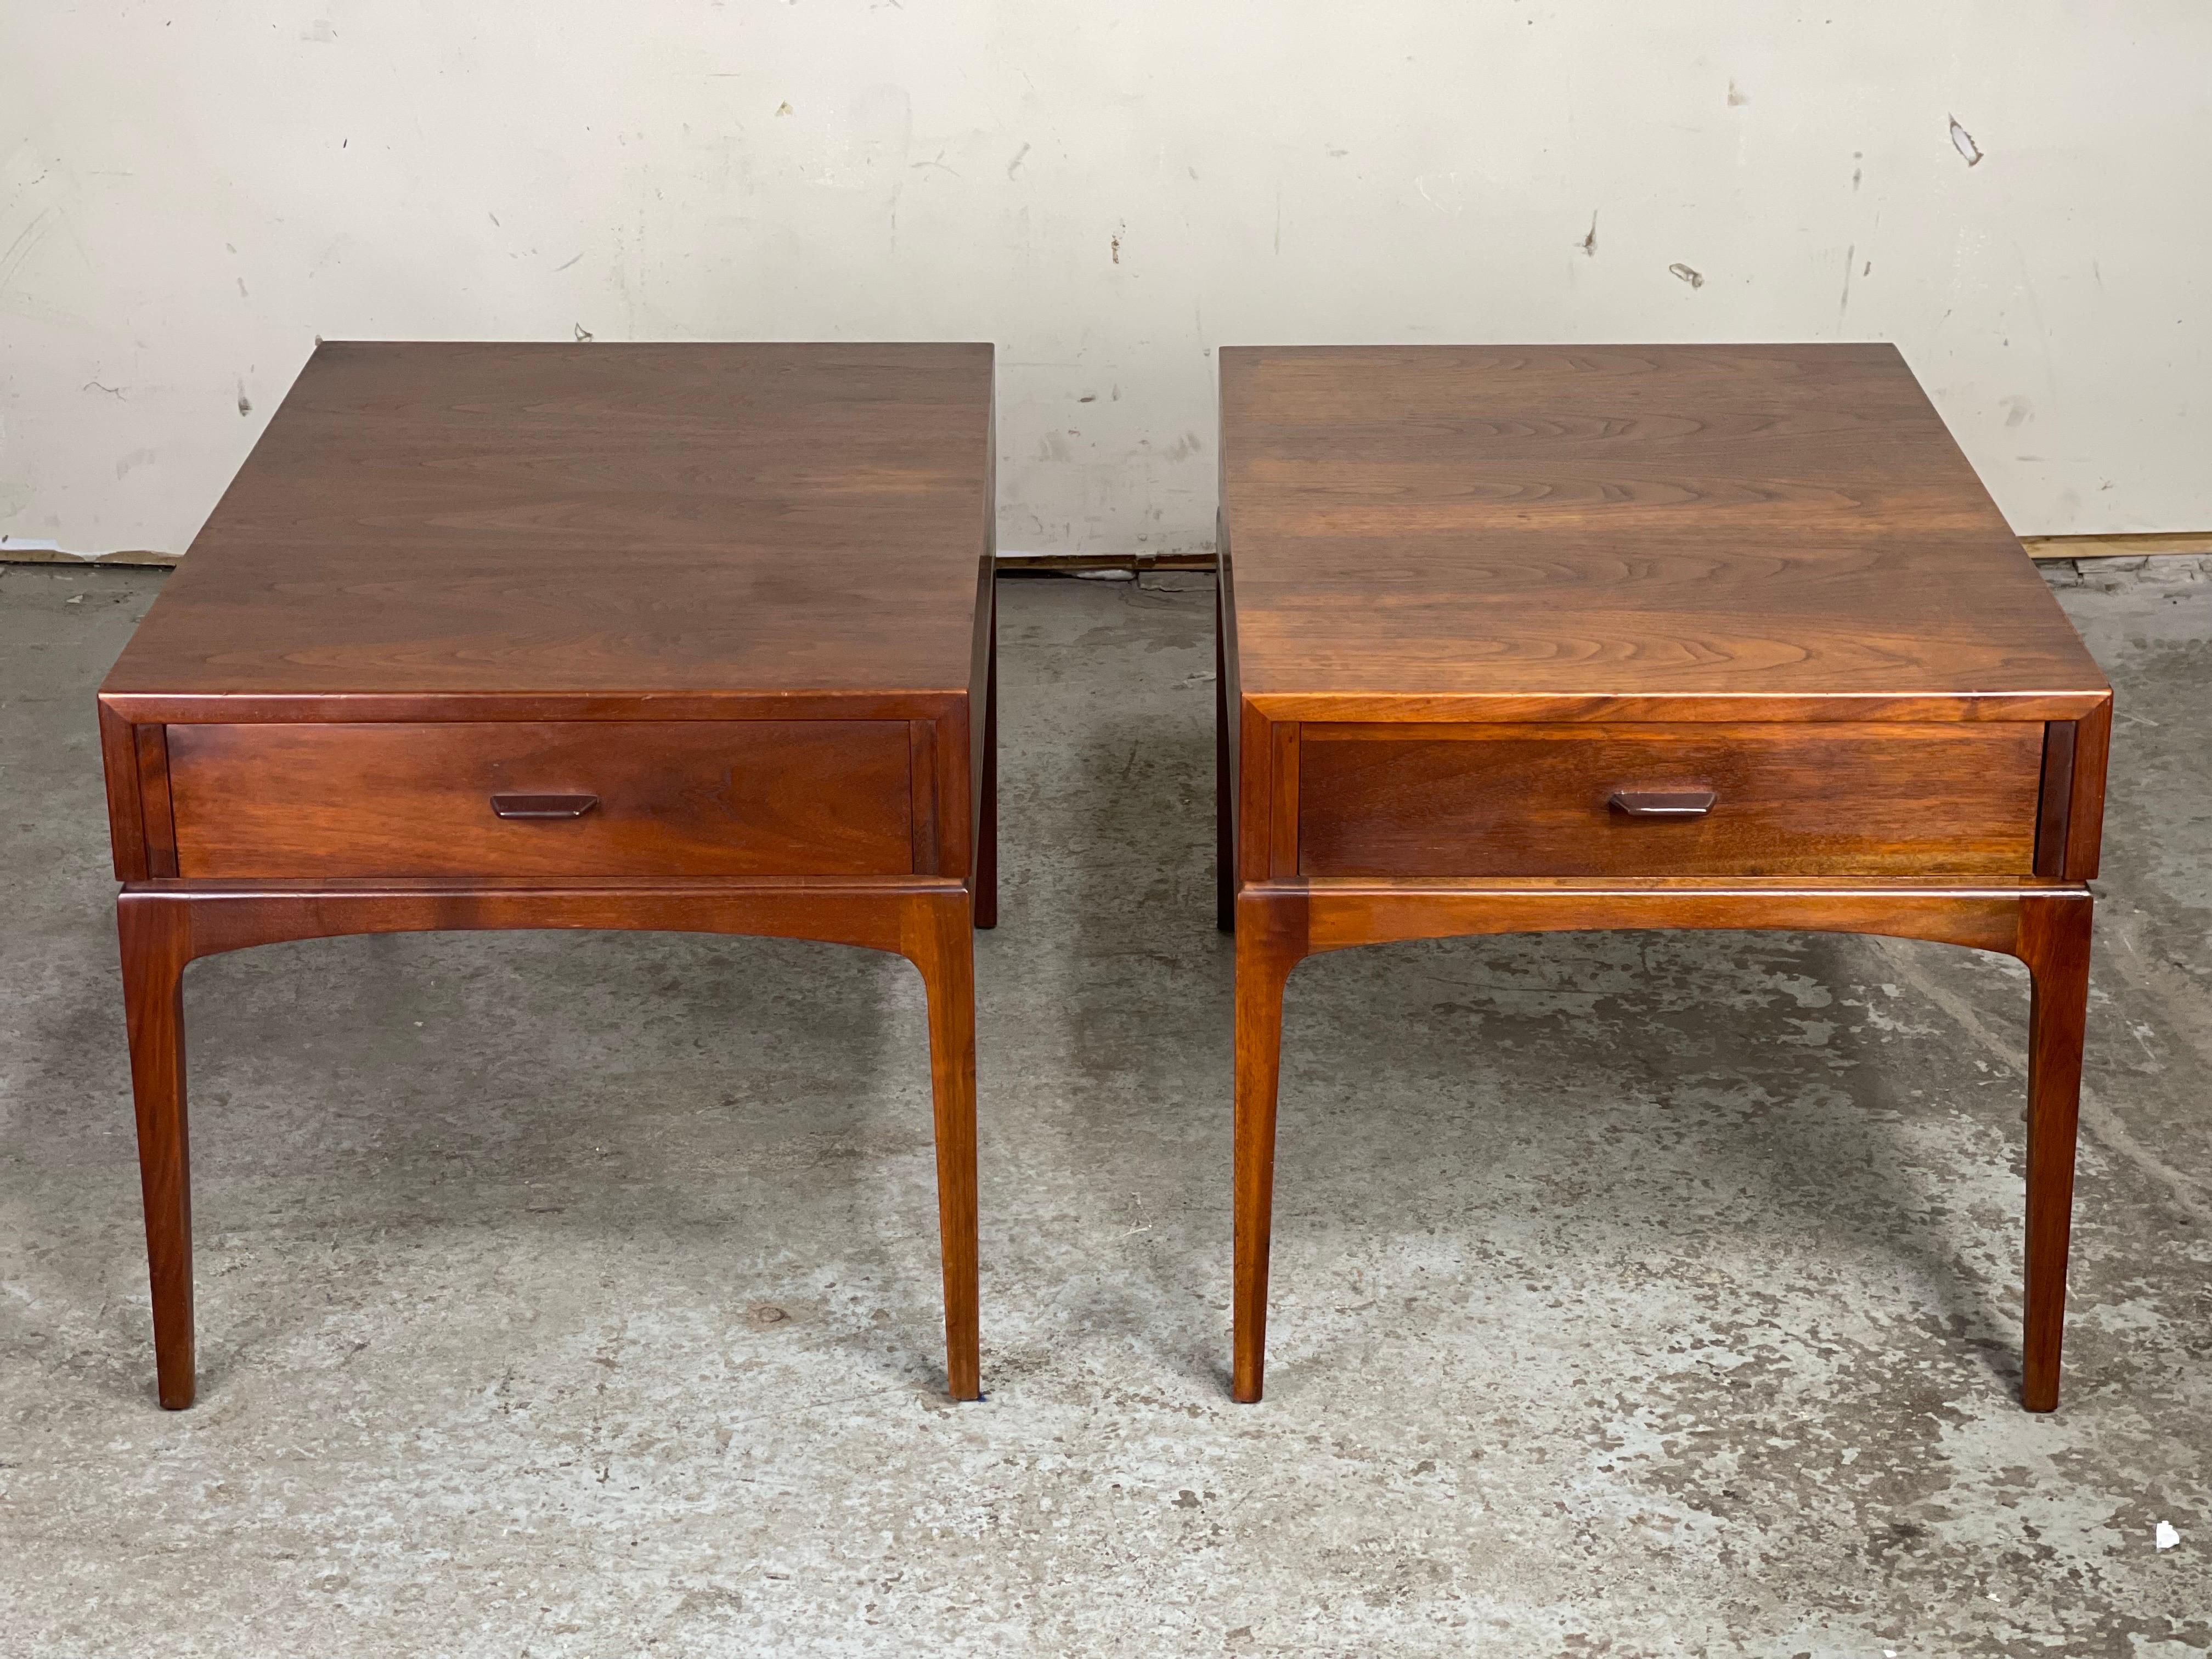 Rare Set of Mid-Century Modern Nightstands by Ace-Hi in Solid Walnut 1